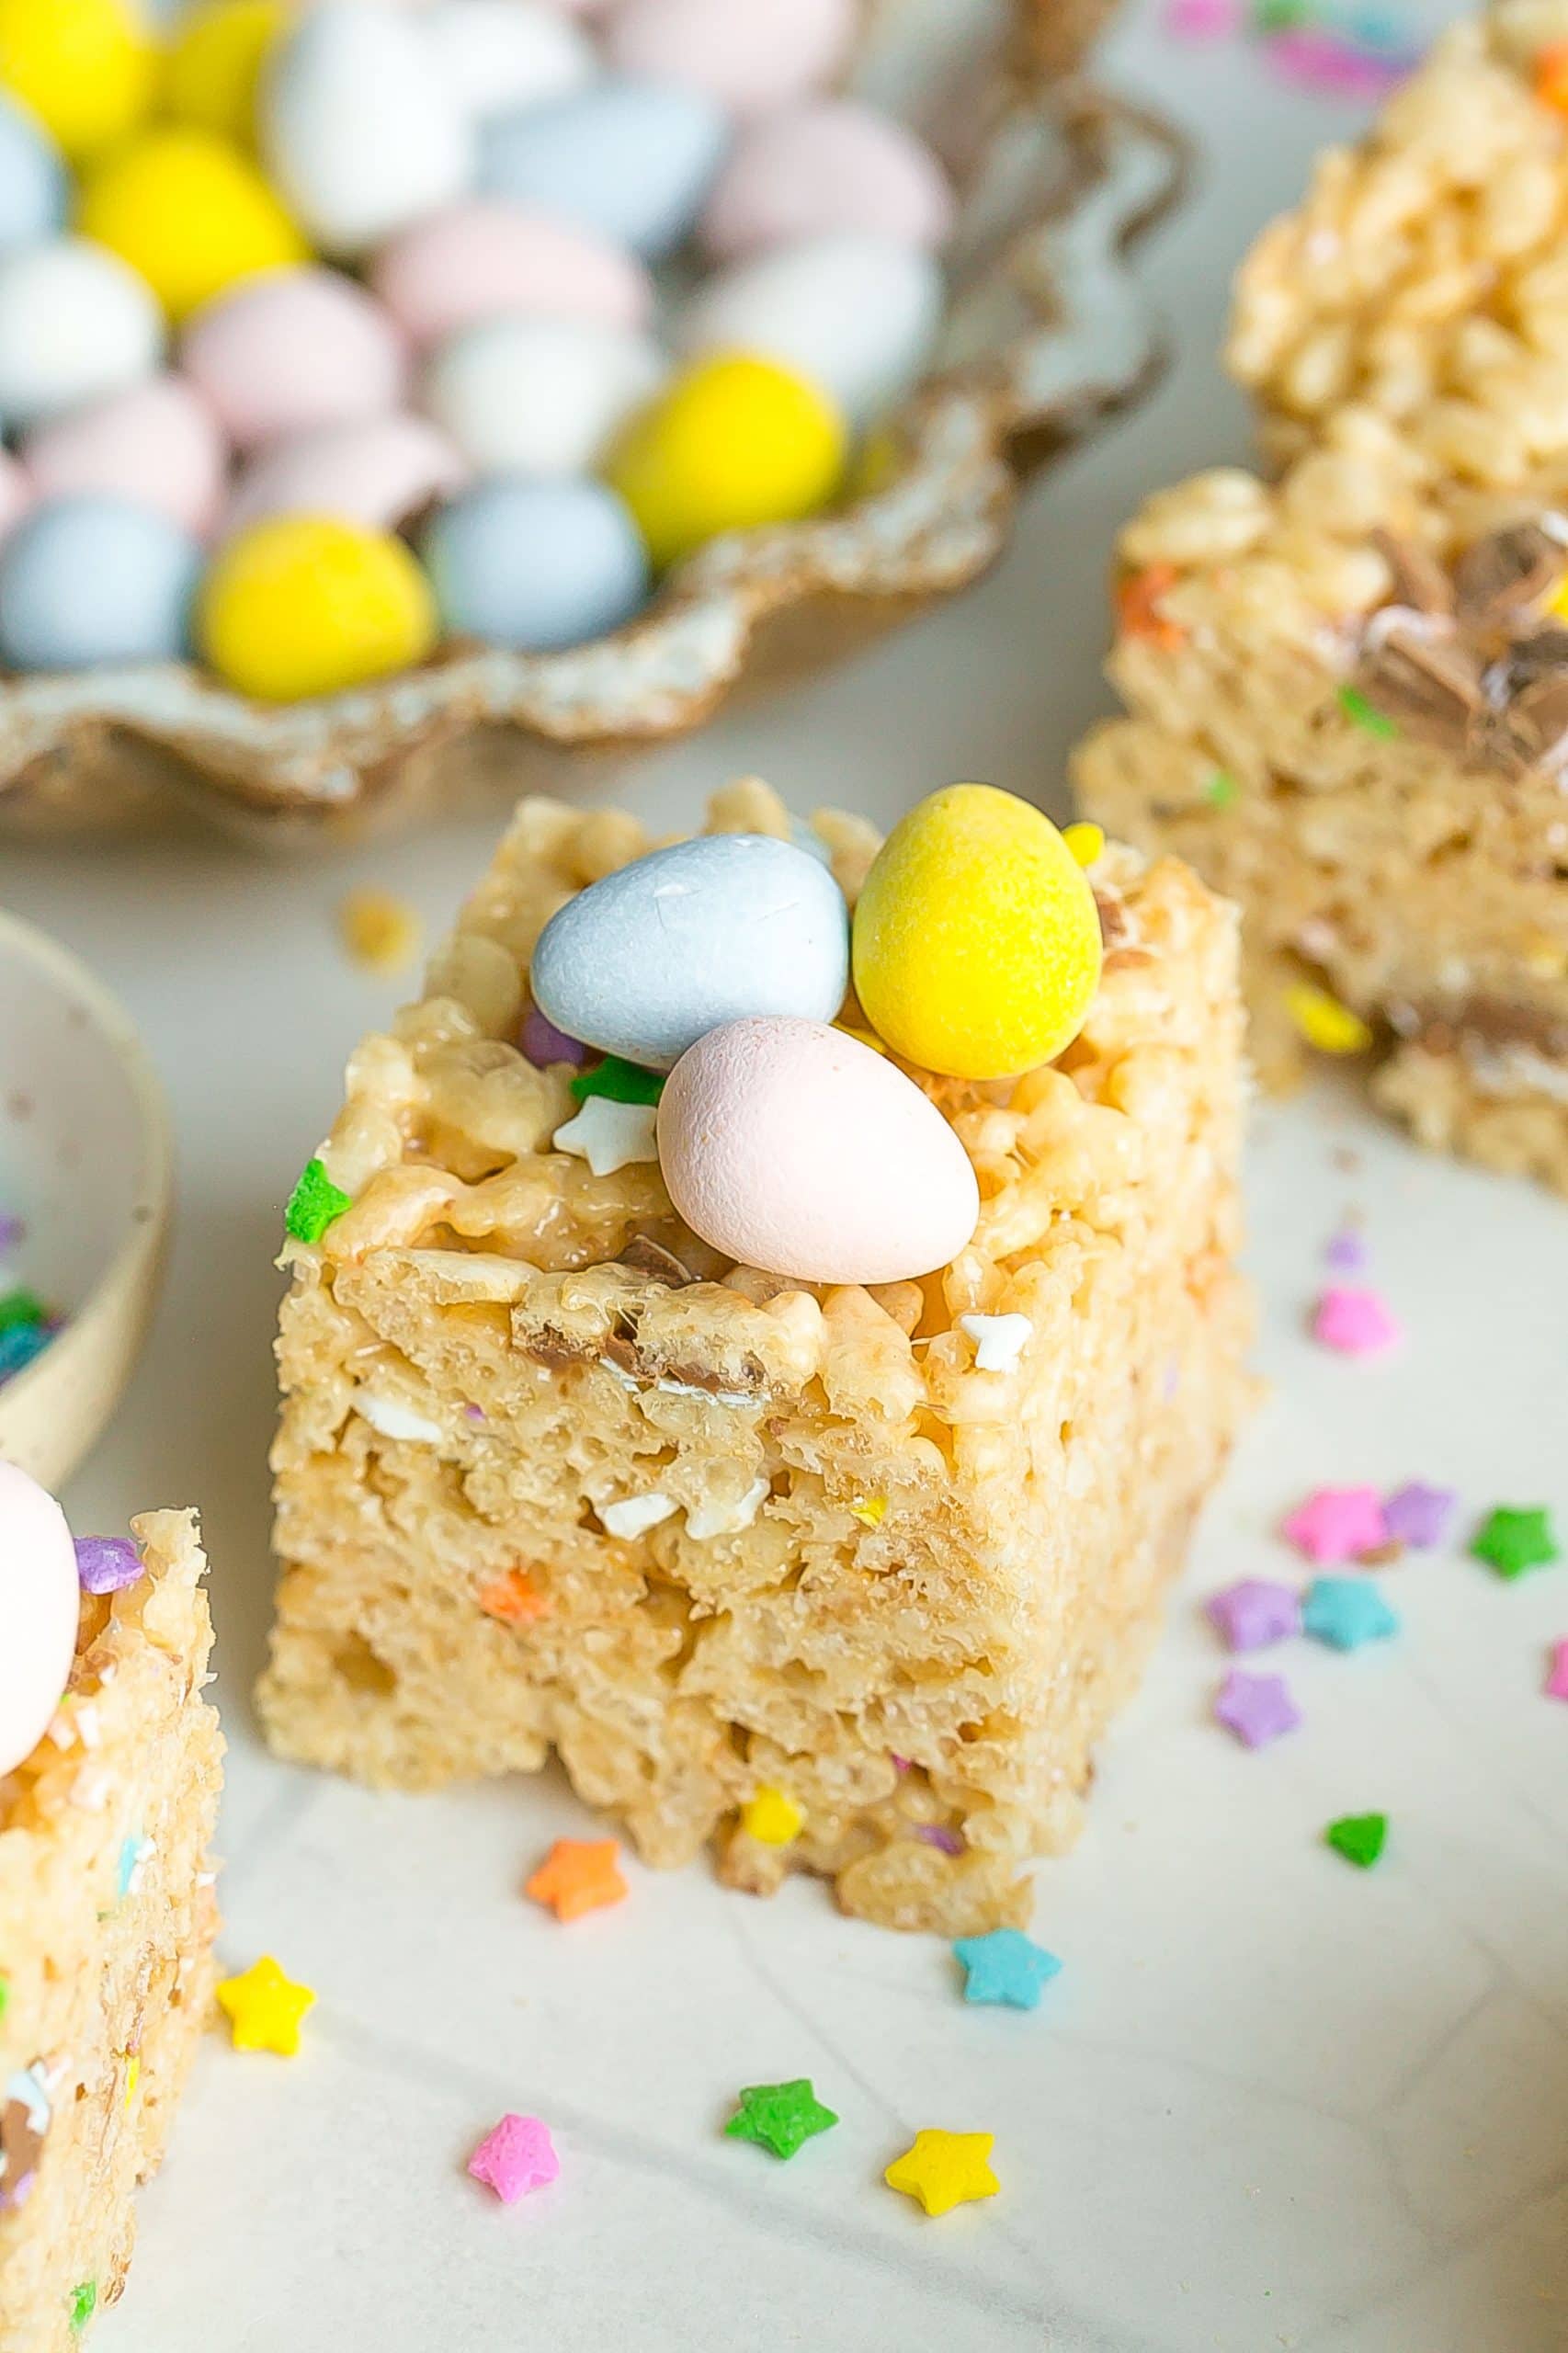 M&M's Crispy New Easter Flavor Is Inspired By This Classic Treat